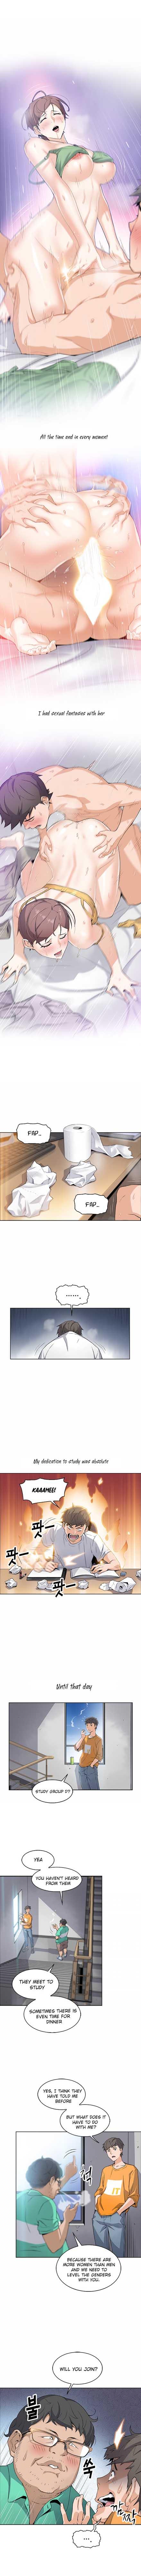 Camshow Housekeeper [Neck Pillow, Paper] Ch.49/49 [English] [Manhwa PDF] Completed Amature - Page 9